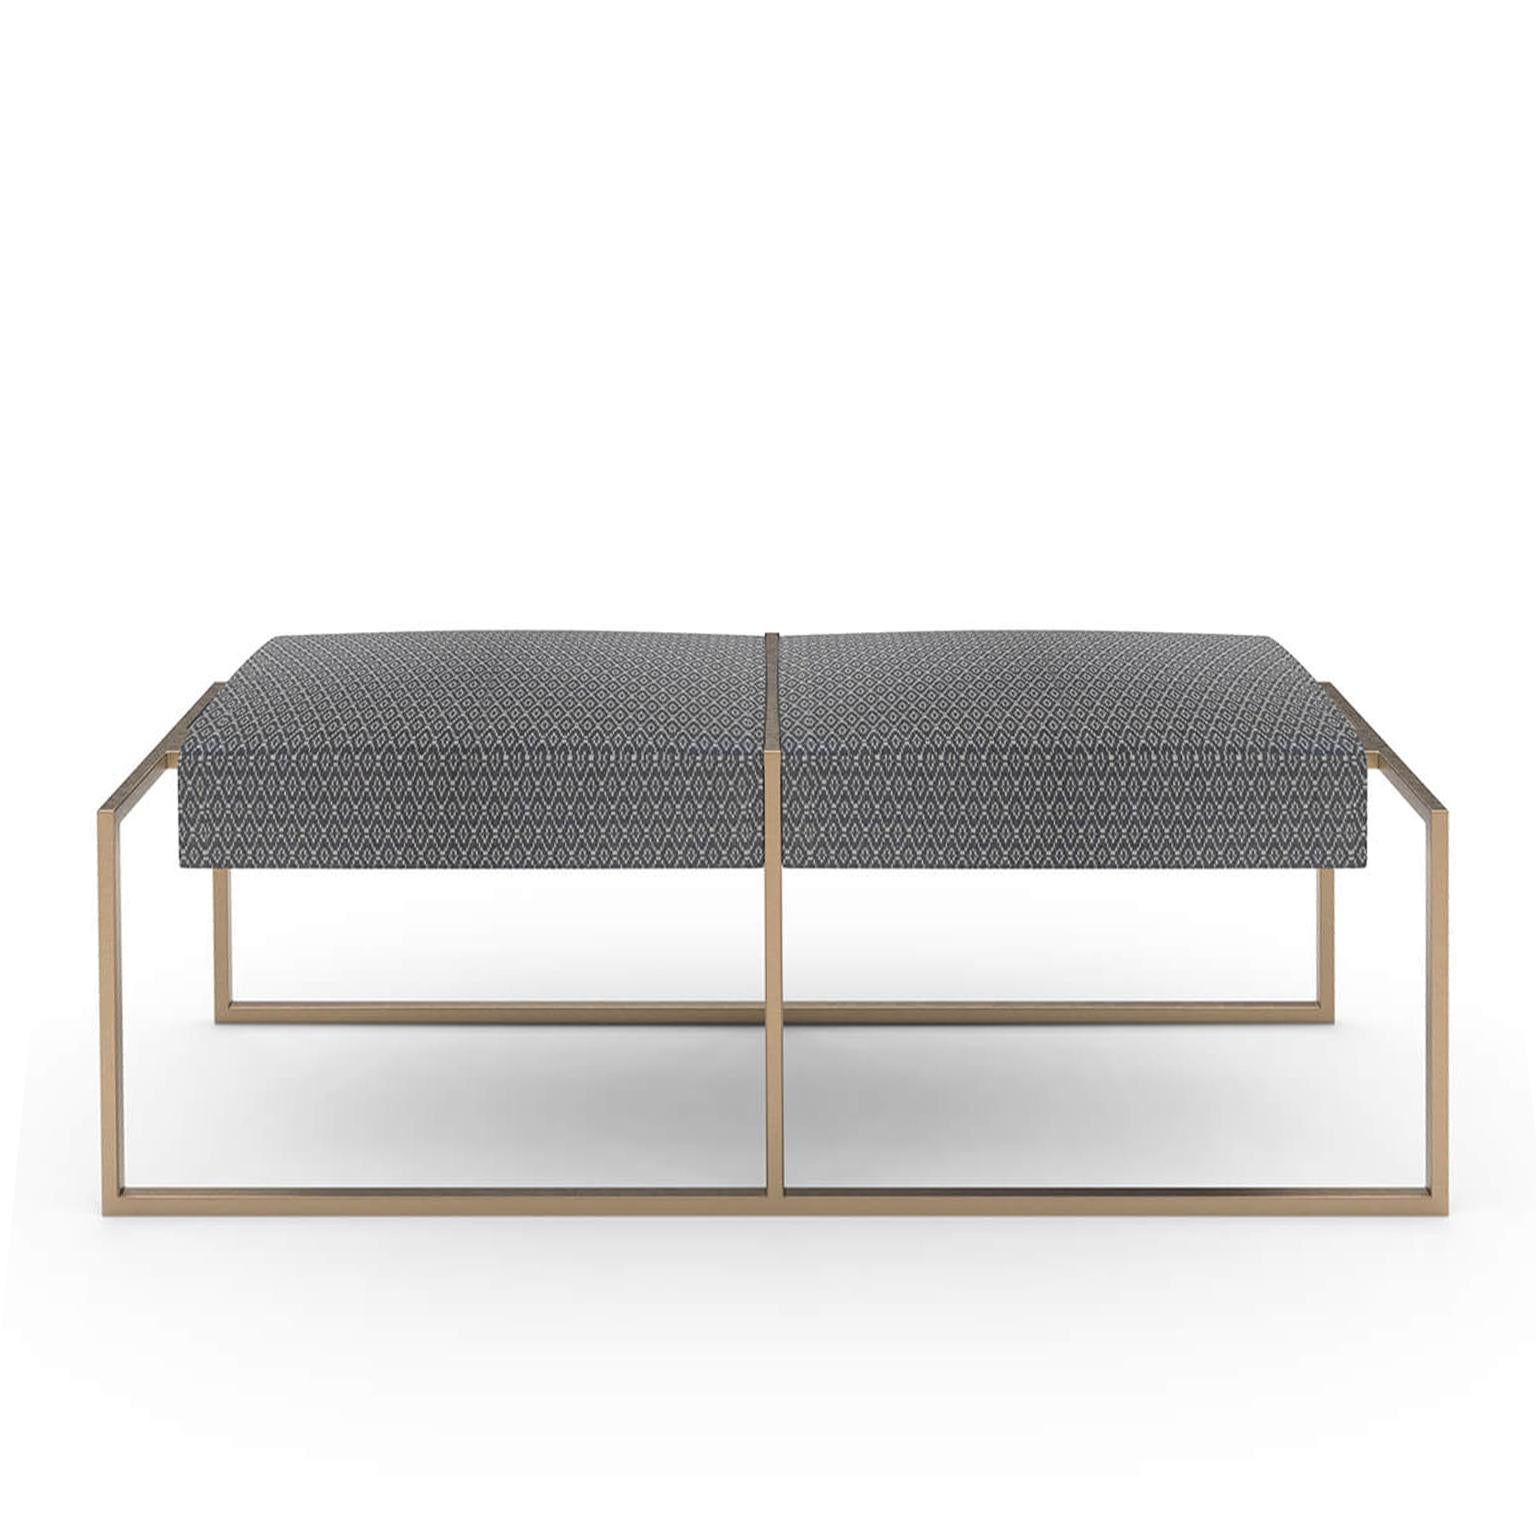 Famed brass bench by Lagu
Designed by Ufuk Ceylan
Dimensions: W 150 x D 45 x H 47 cm.
Materials: Fabric, Foam, Brass.

The Famed bench...harmoniously combines brass and fabric brining a refined elegance and comfort to your home.

LAGU
Istanbul,